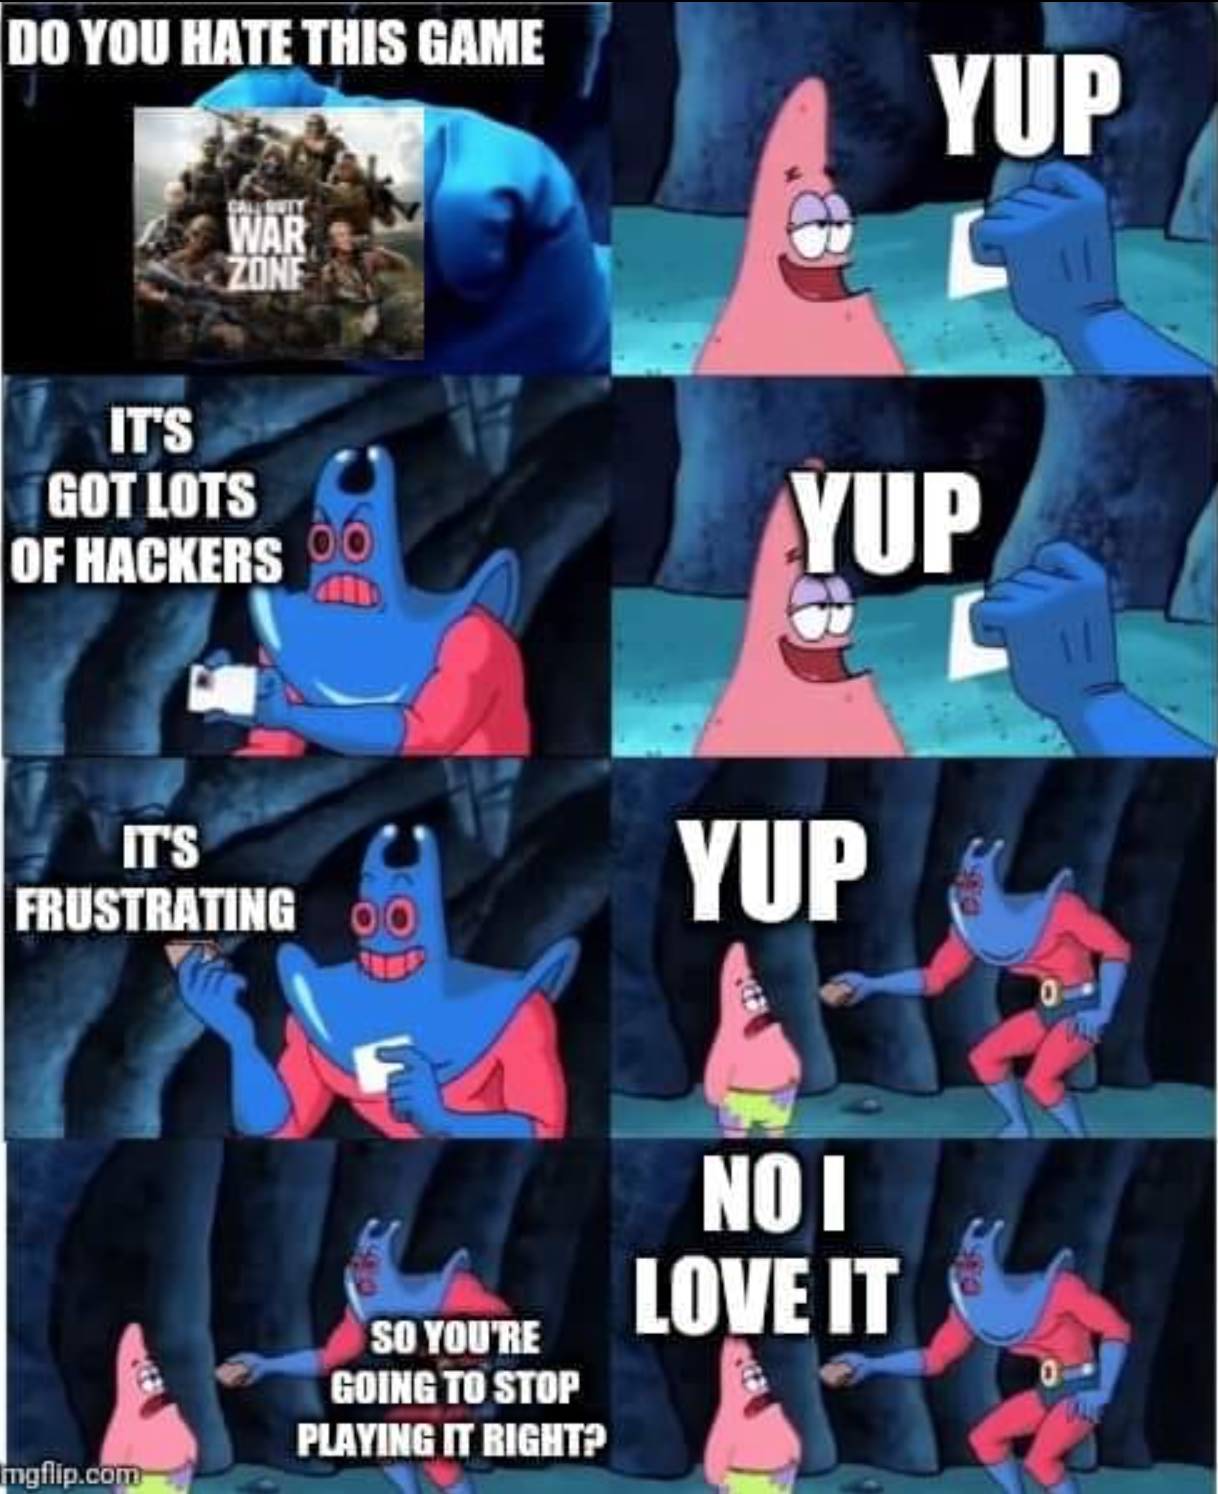 funny gaming memes - patrick wallet meme blank - Do You Hate This Game Yup War Zone Its Got Lots Of Hackers Ayup It'S Frustrating Yup Noi Love It So You'Re Going To Stop Playing It Right? ingflip.com